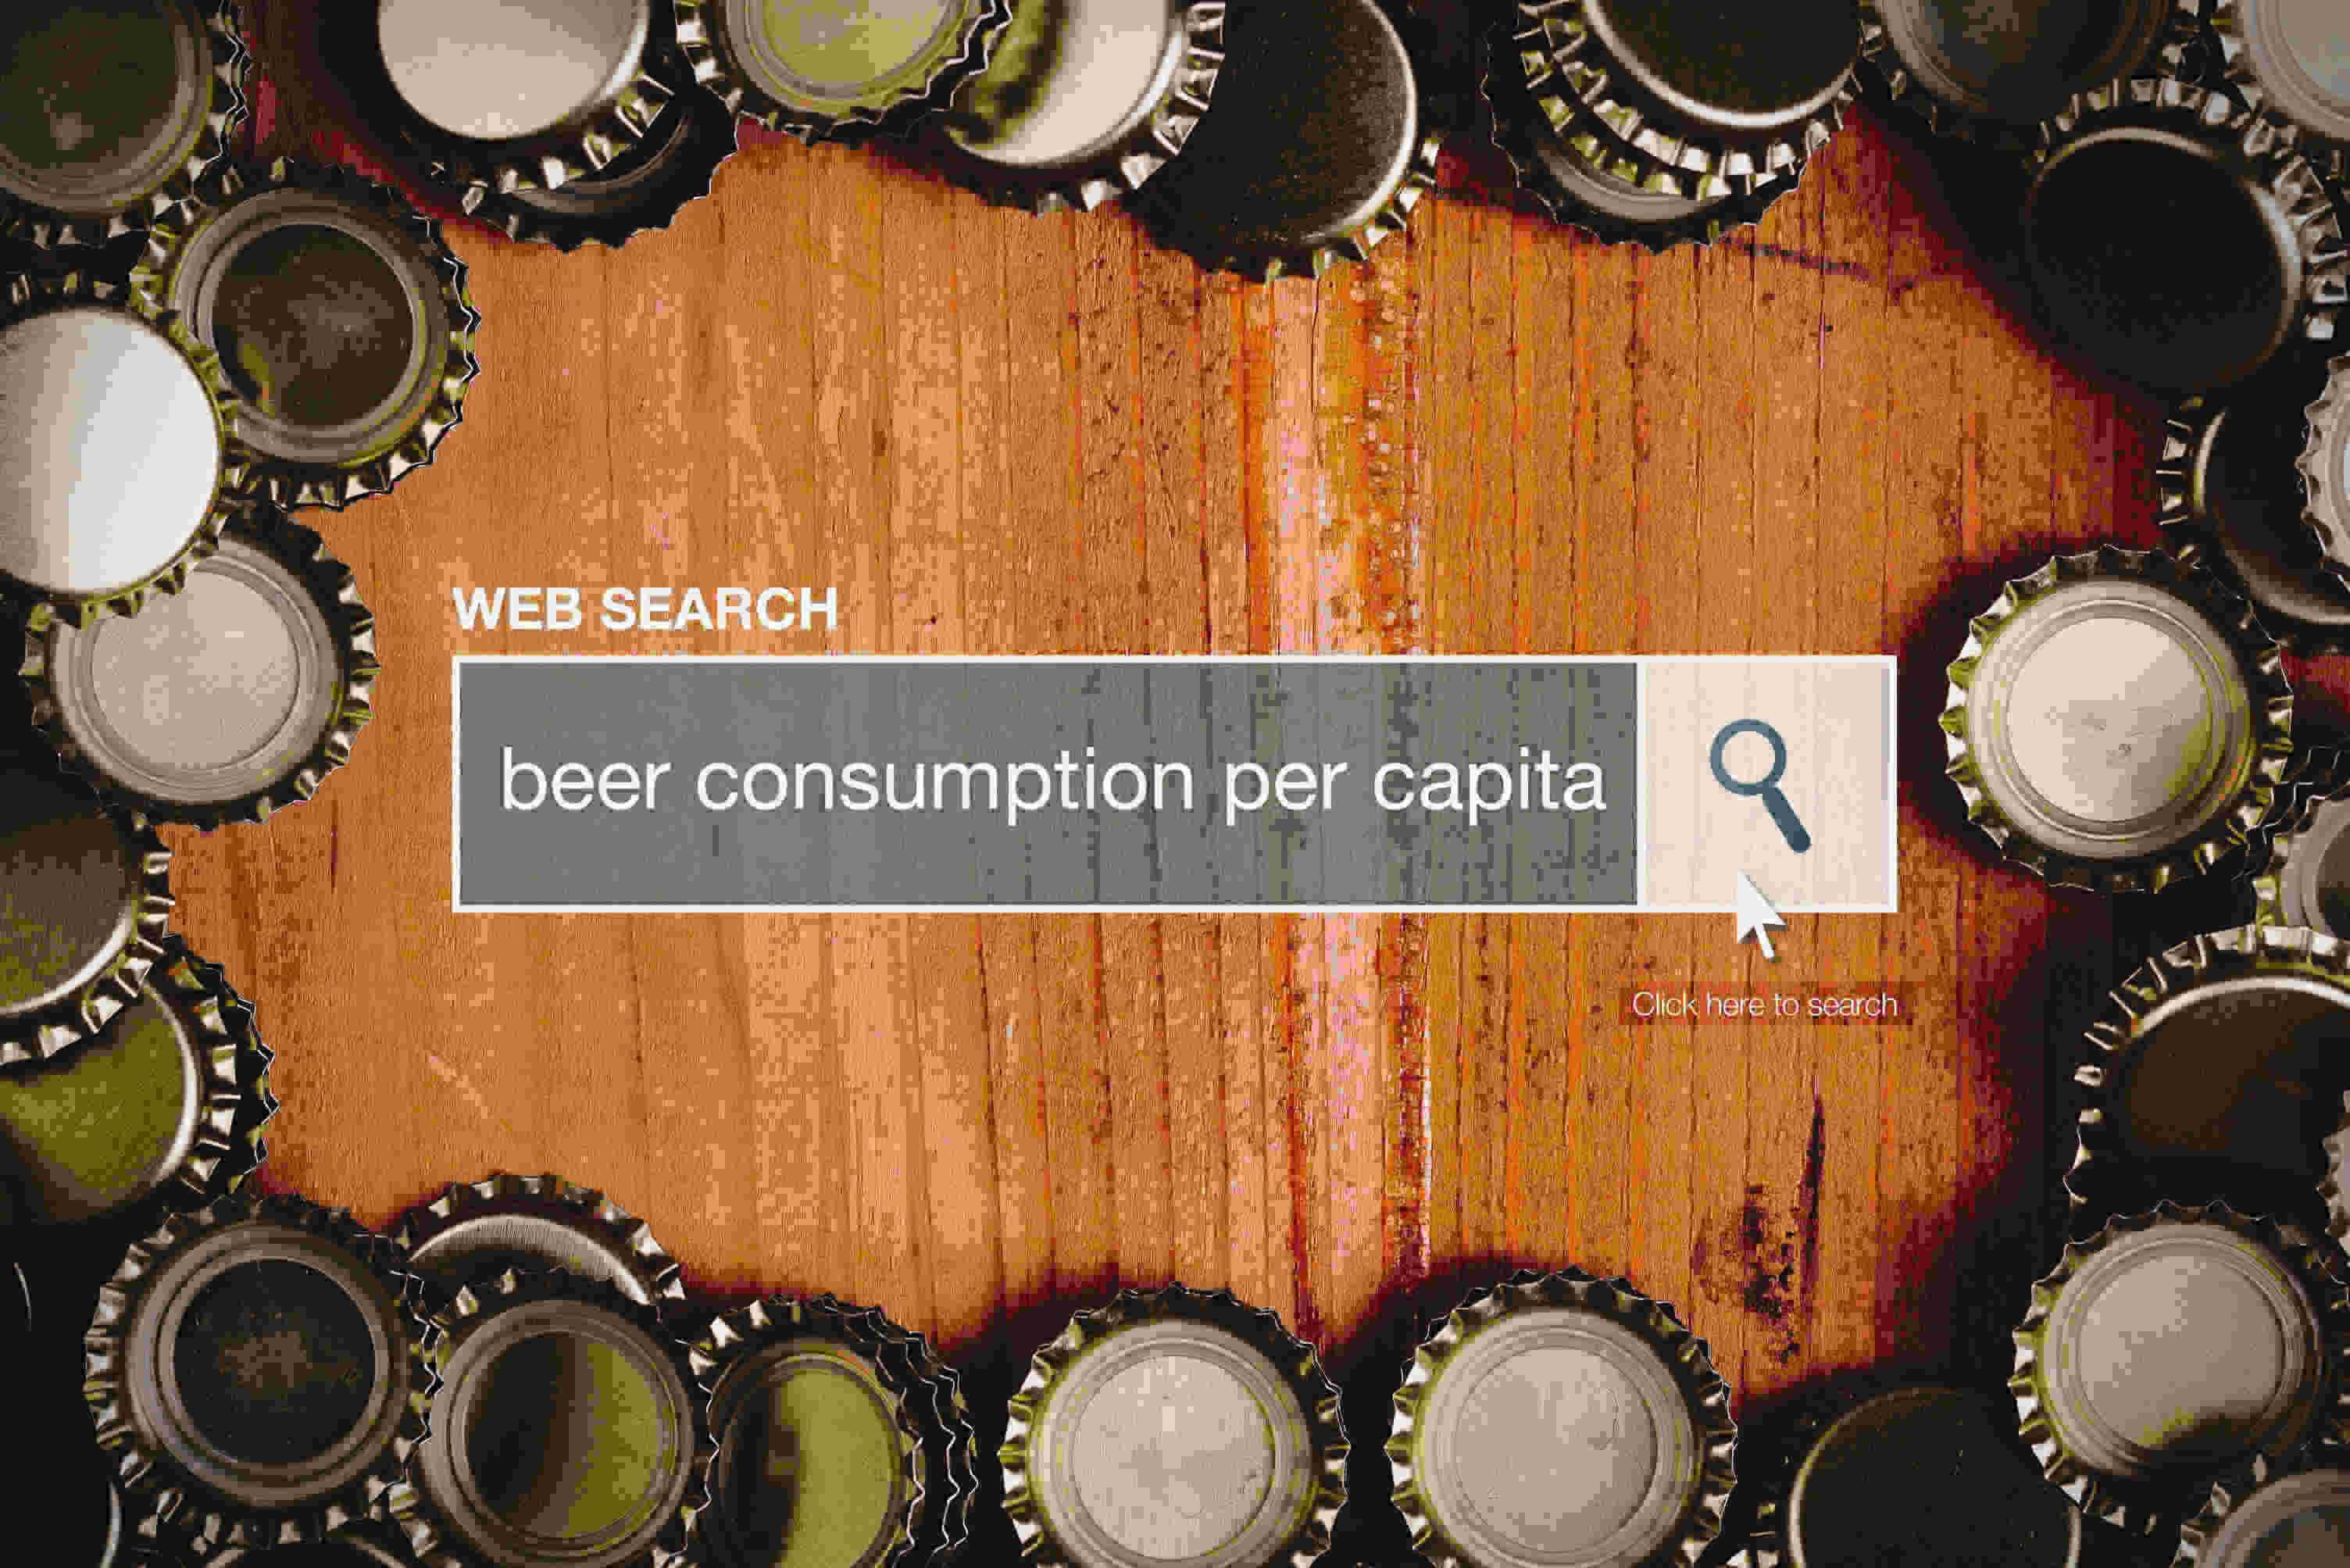 Despite the number of adults (15 and over) coming into the market increasing slightly by 0.3%, beer and cider consumption decreased by 1.5% and 6.9% respectively in 2015.